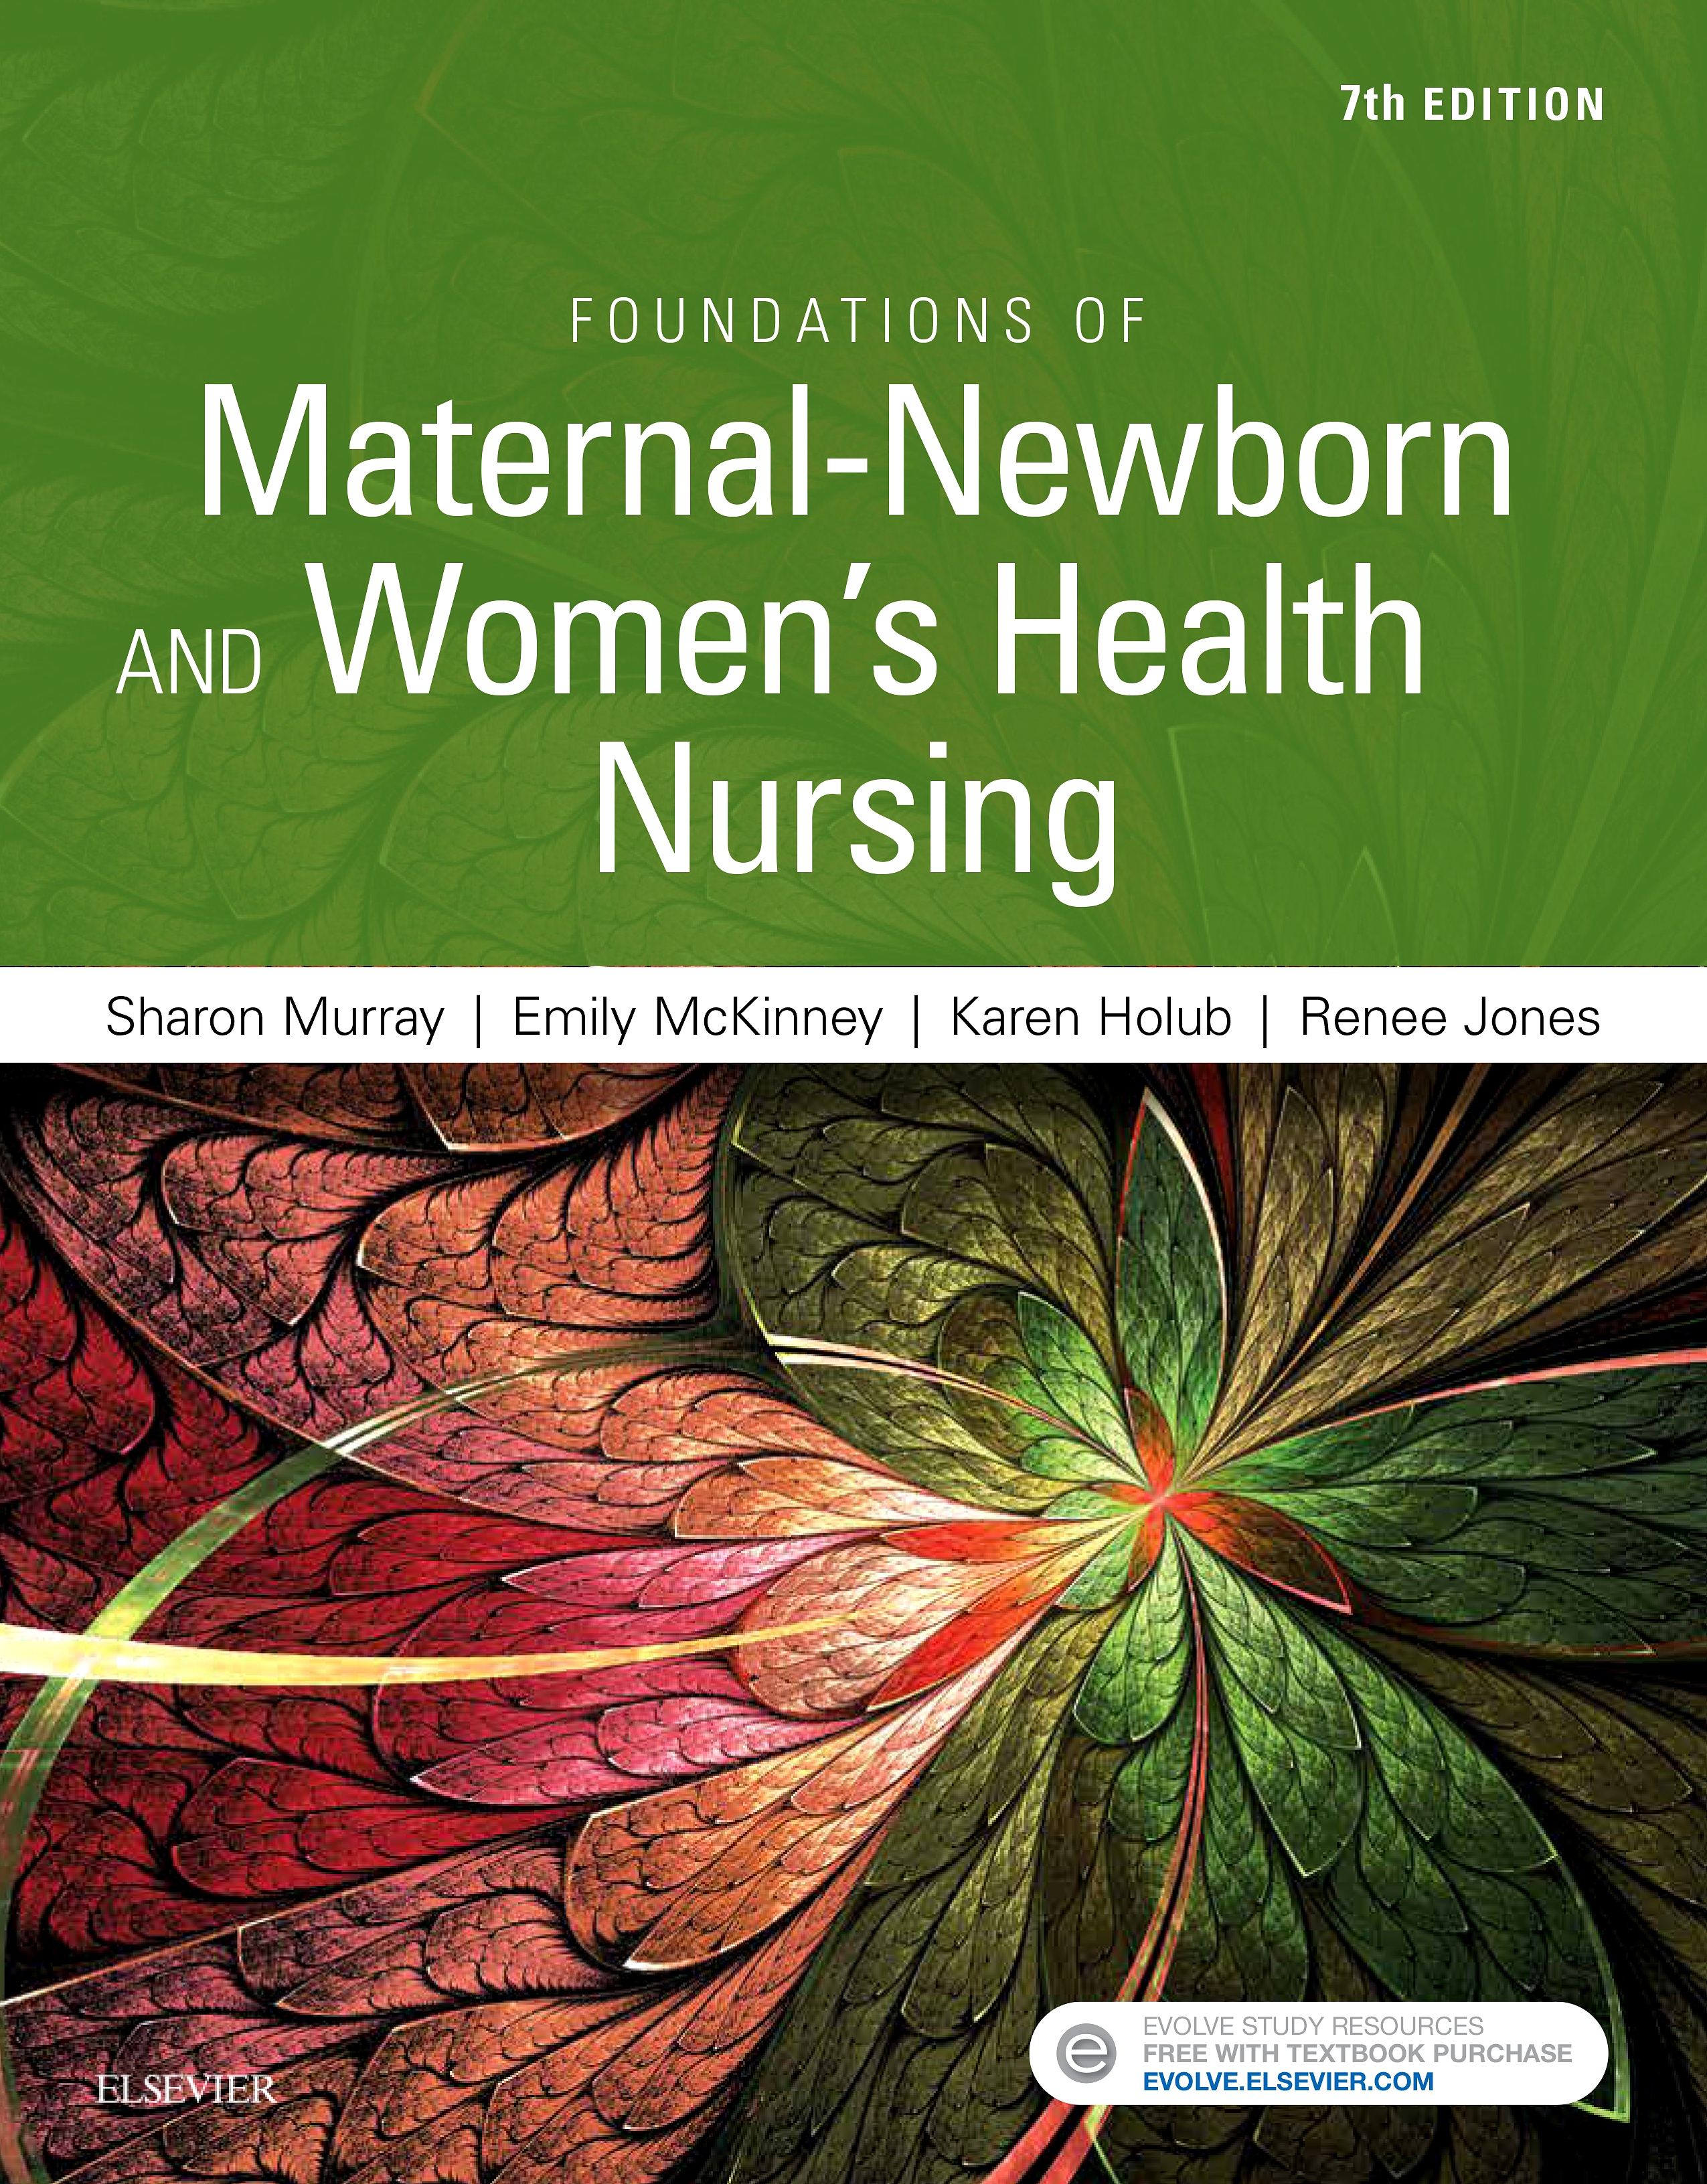 Evolve Resources for Foundations of Maternal-Newborn & Women's Health Nursing, 7th